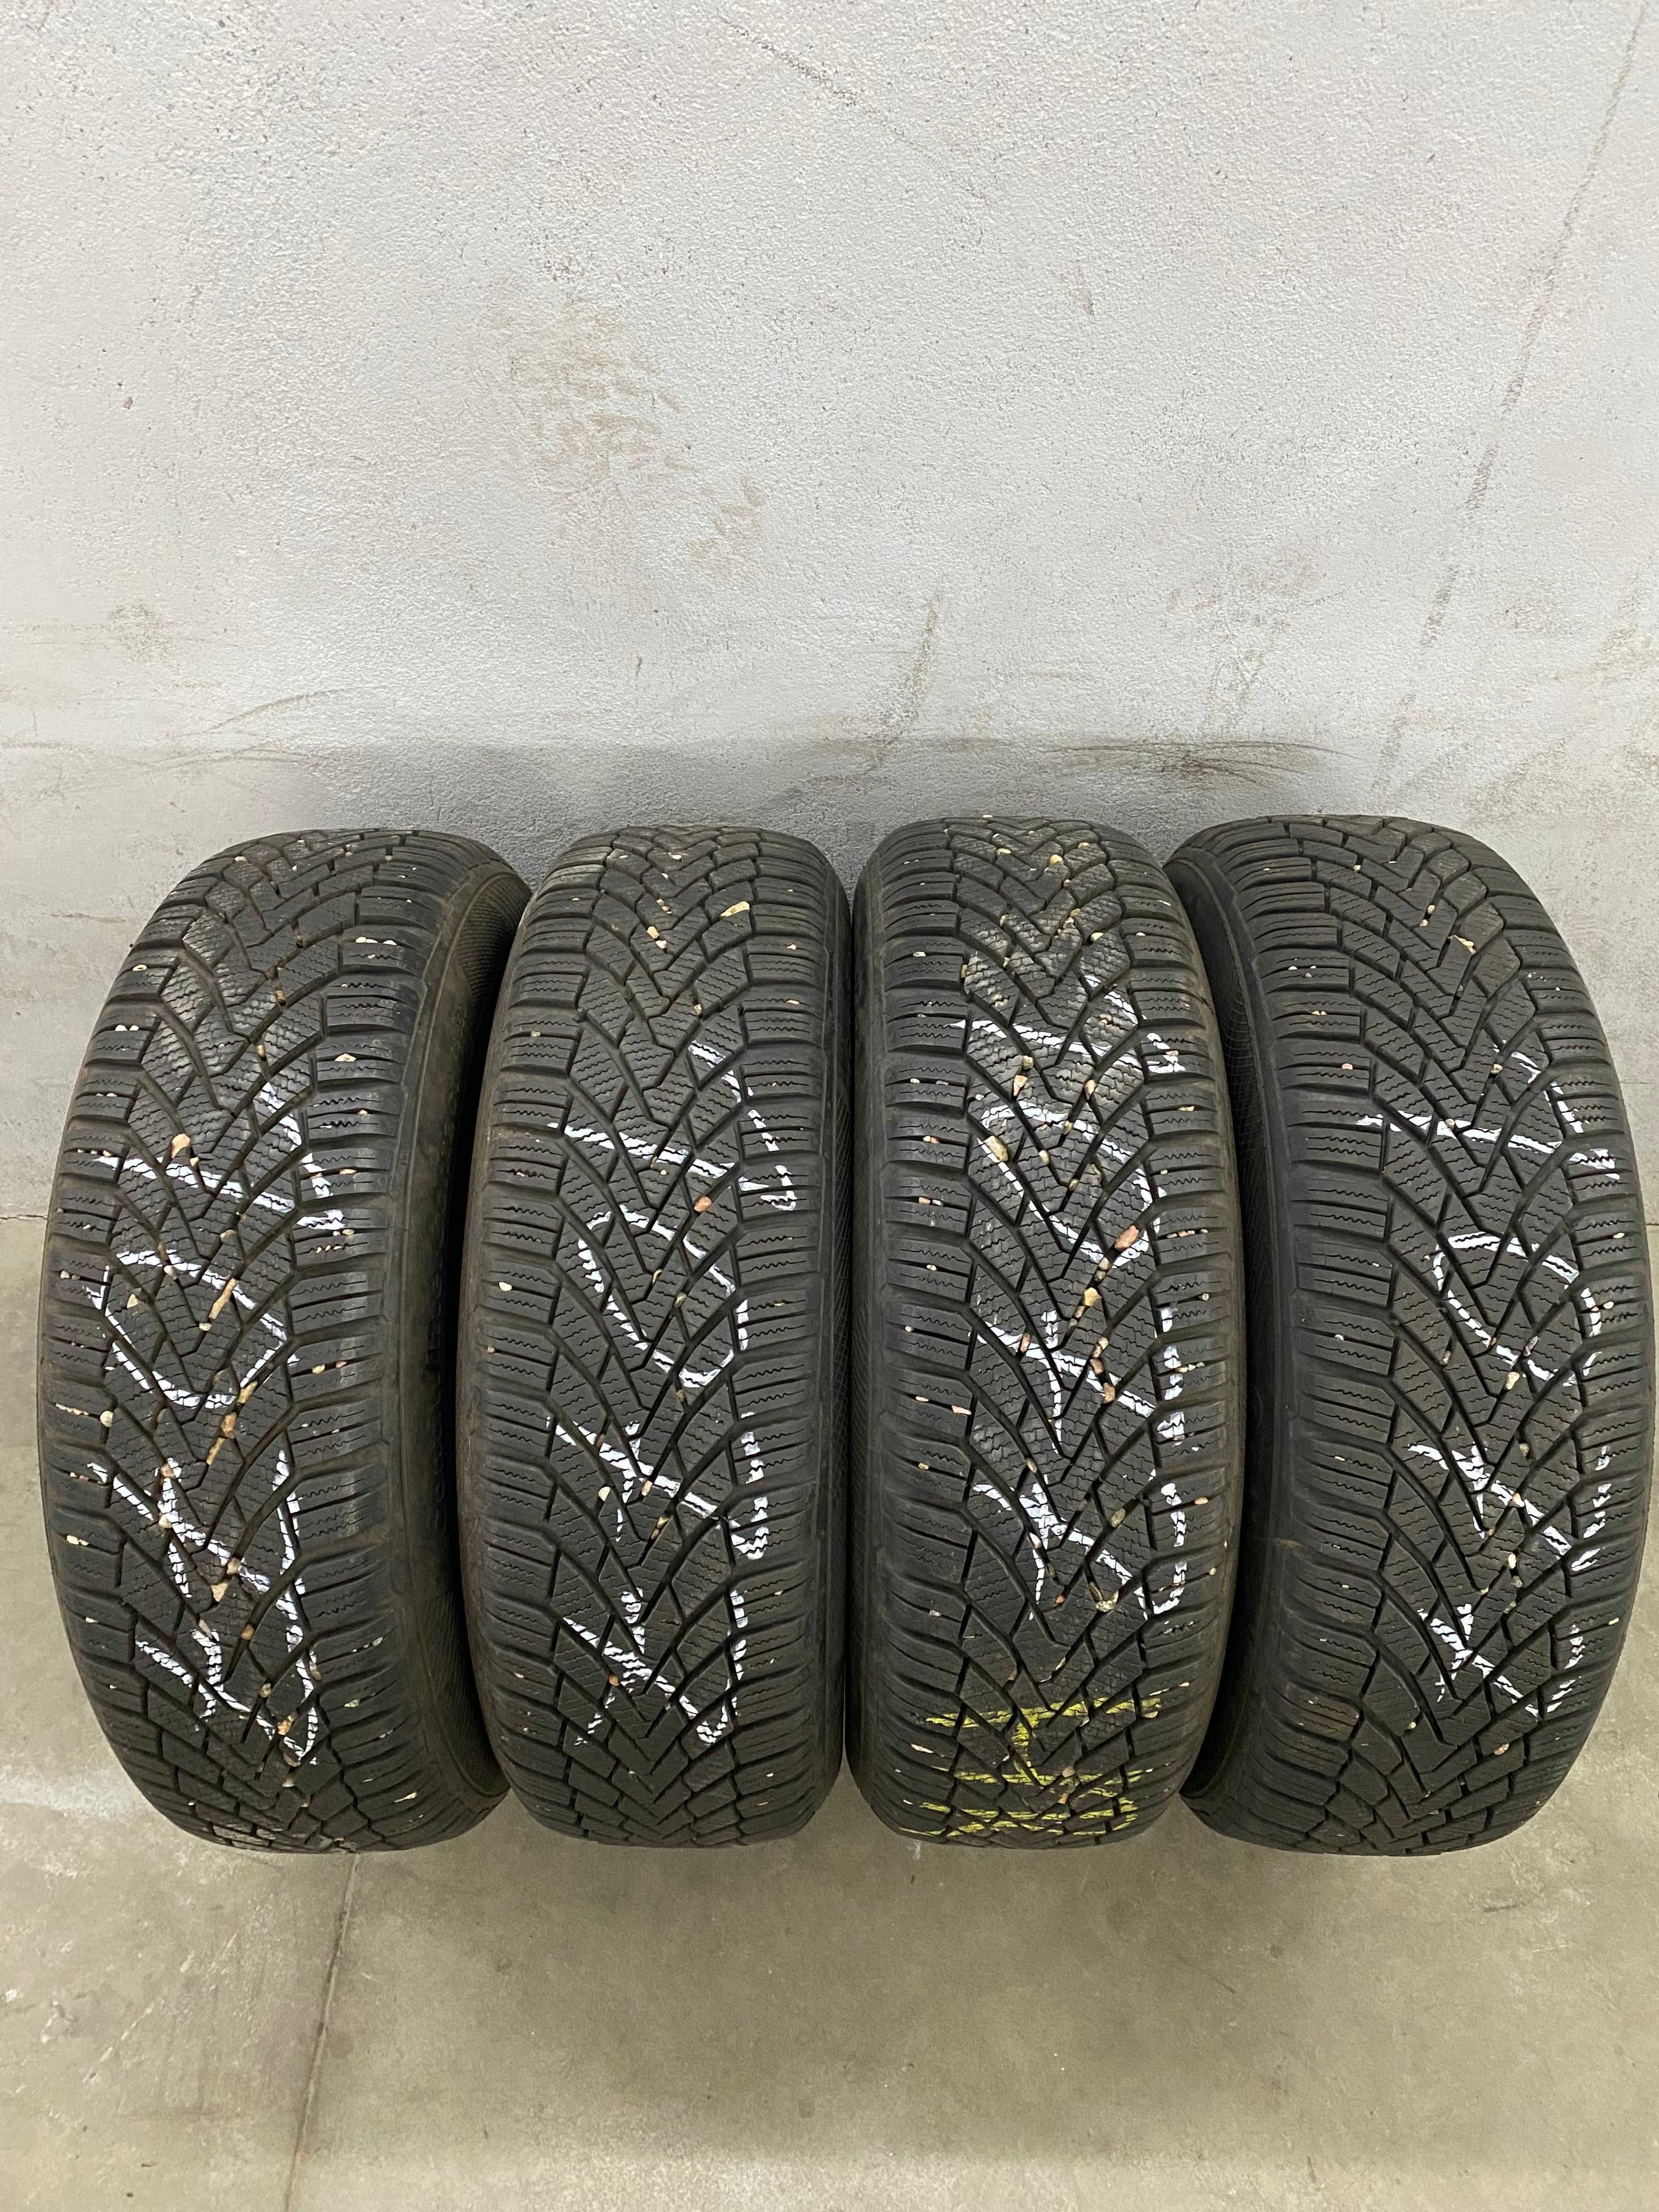 Continental ContiWinterContact Ts850 185/65R15 M+S Nr 1077